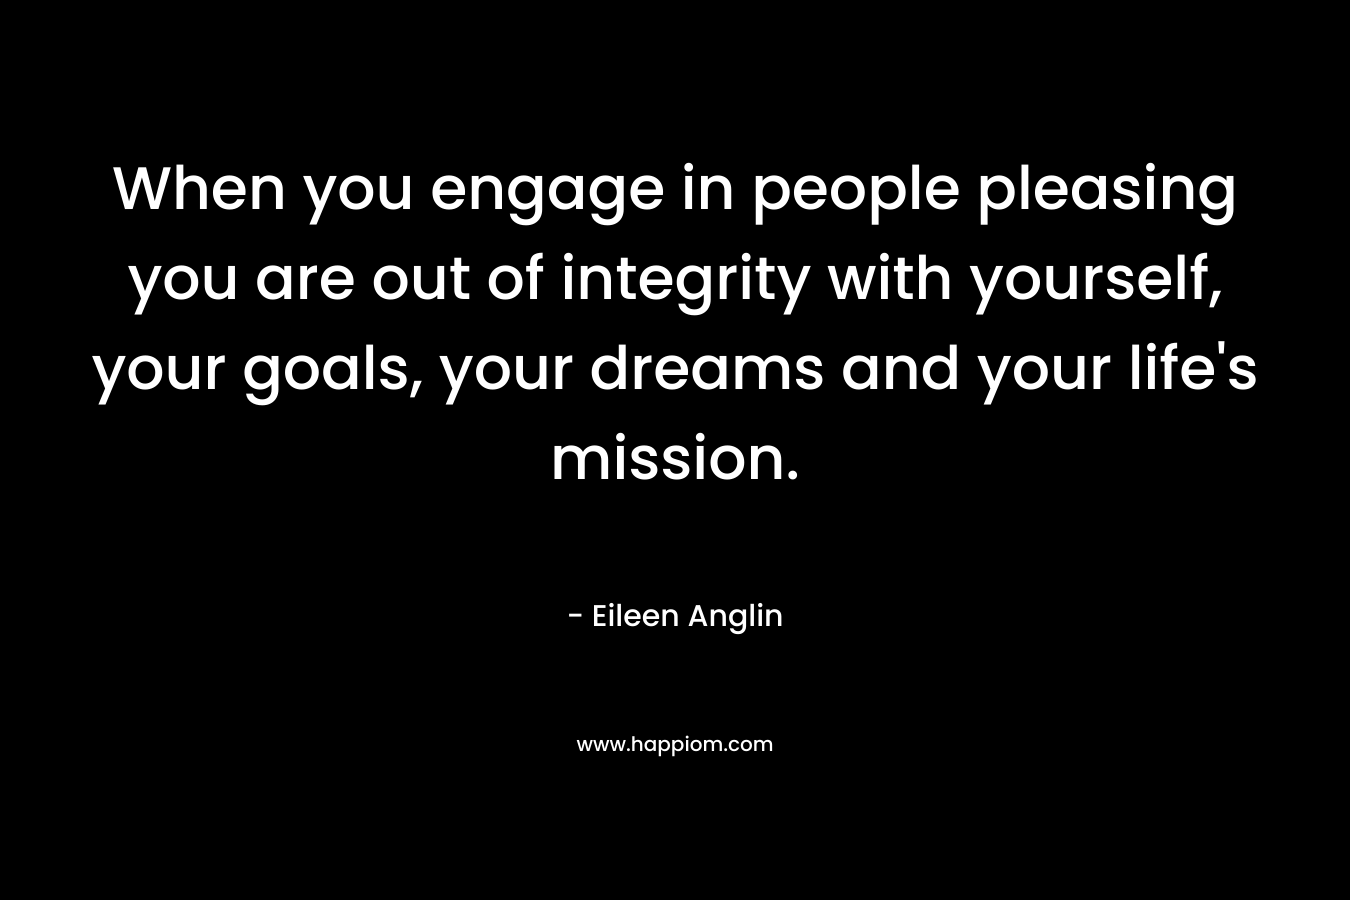 When you engage in people pleasing you are out of integrity with yourself, your goals, your dreams and your life’s mission. – Eileen Anglin